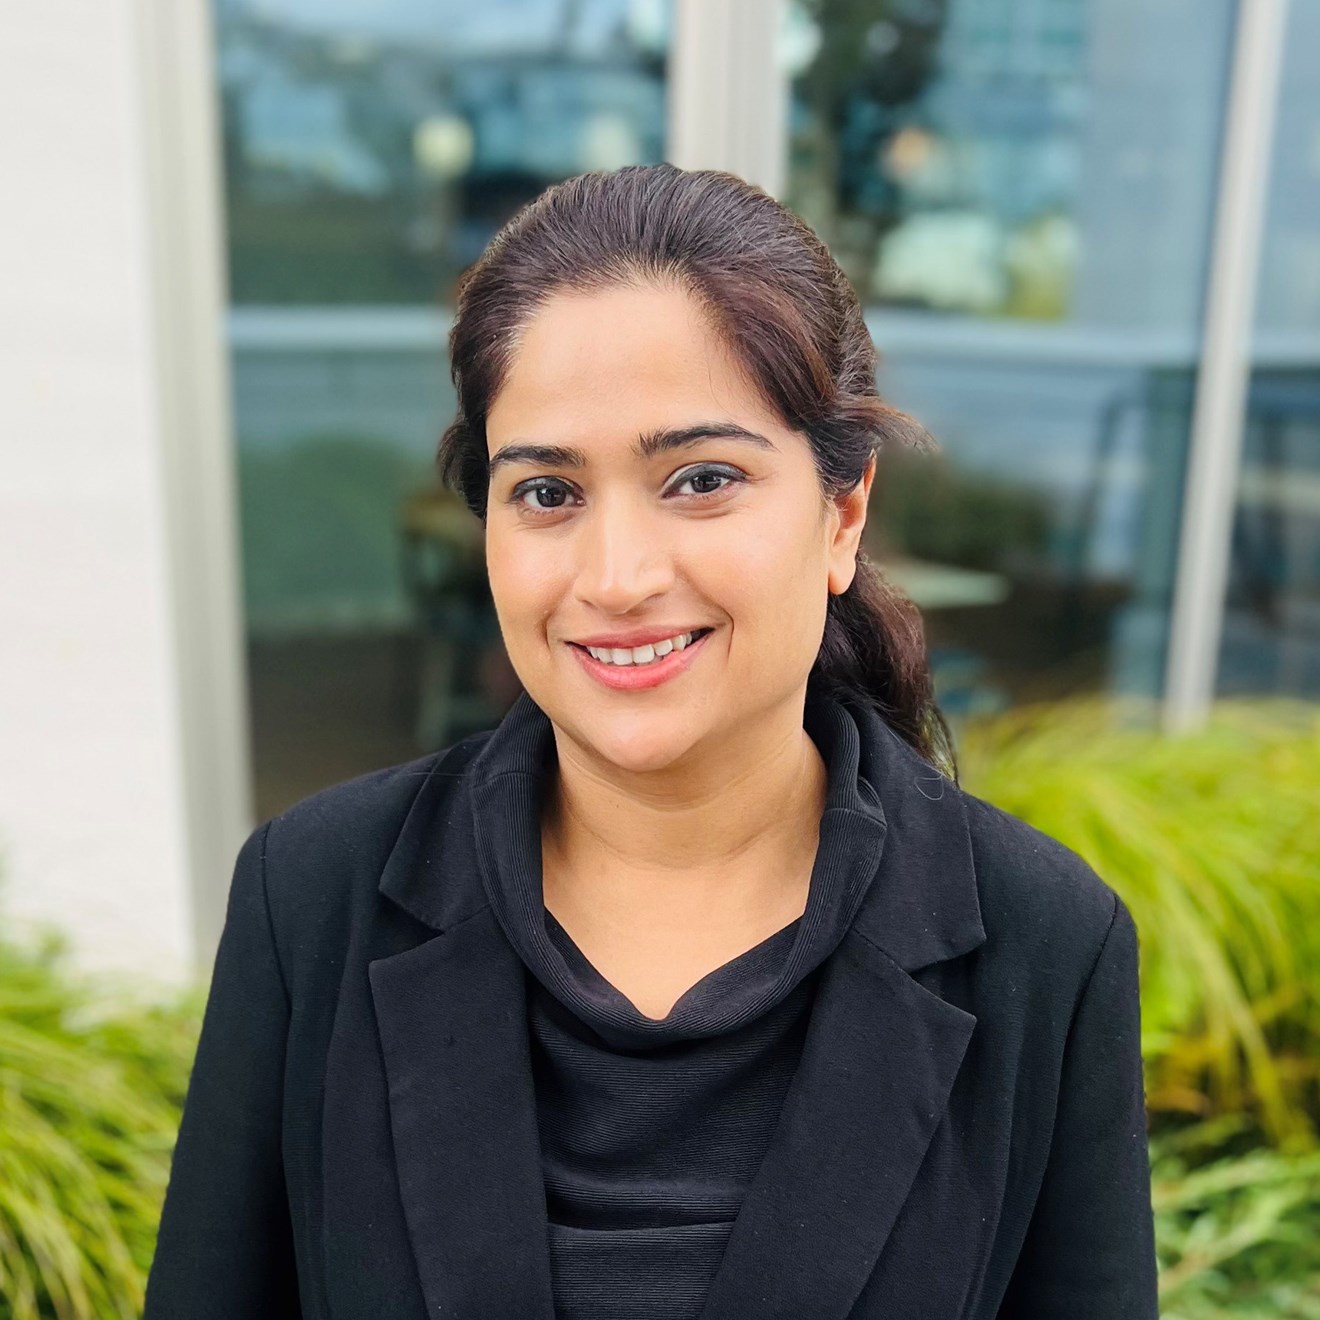 Syeda Ghufran joins Siemens Mobility as Director of Asset Management and Assurance for Customer Services: syedaghufran edited